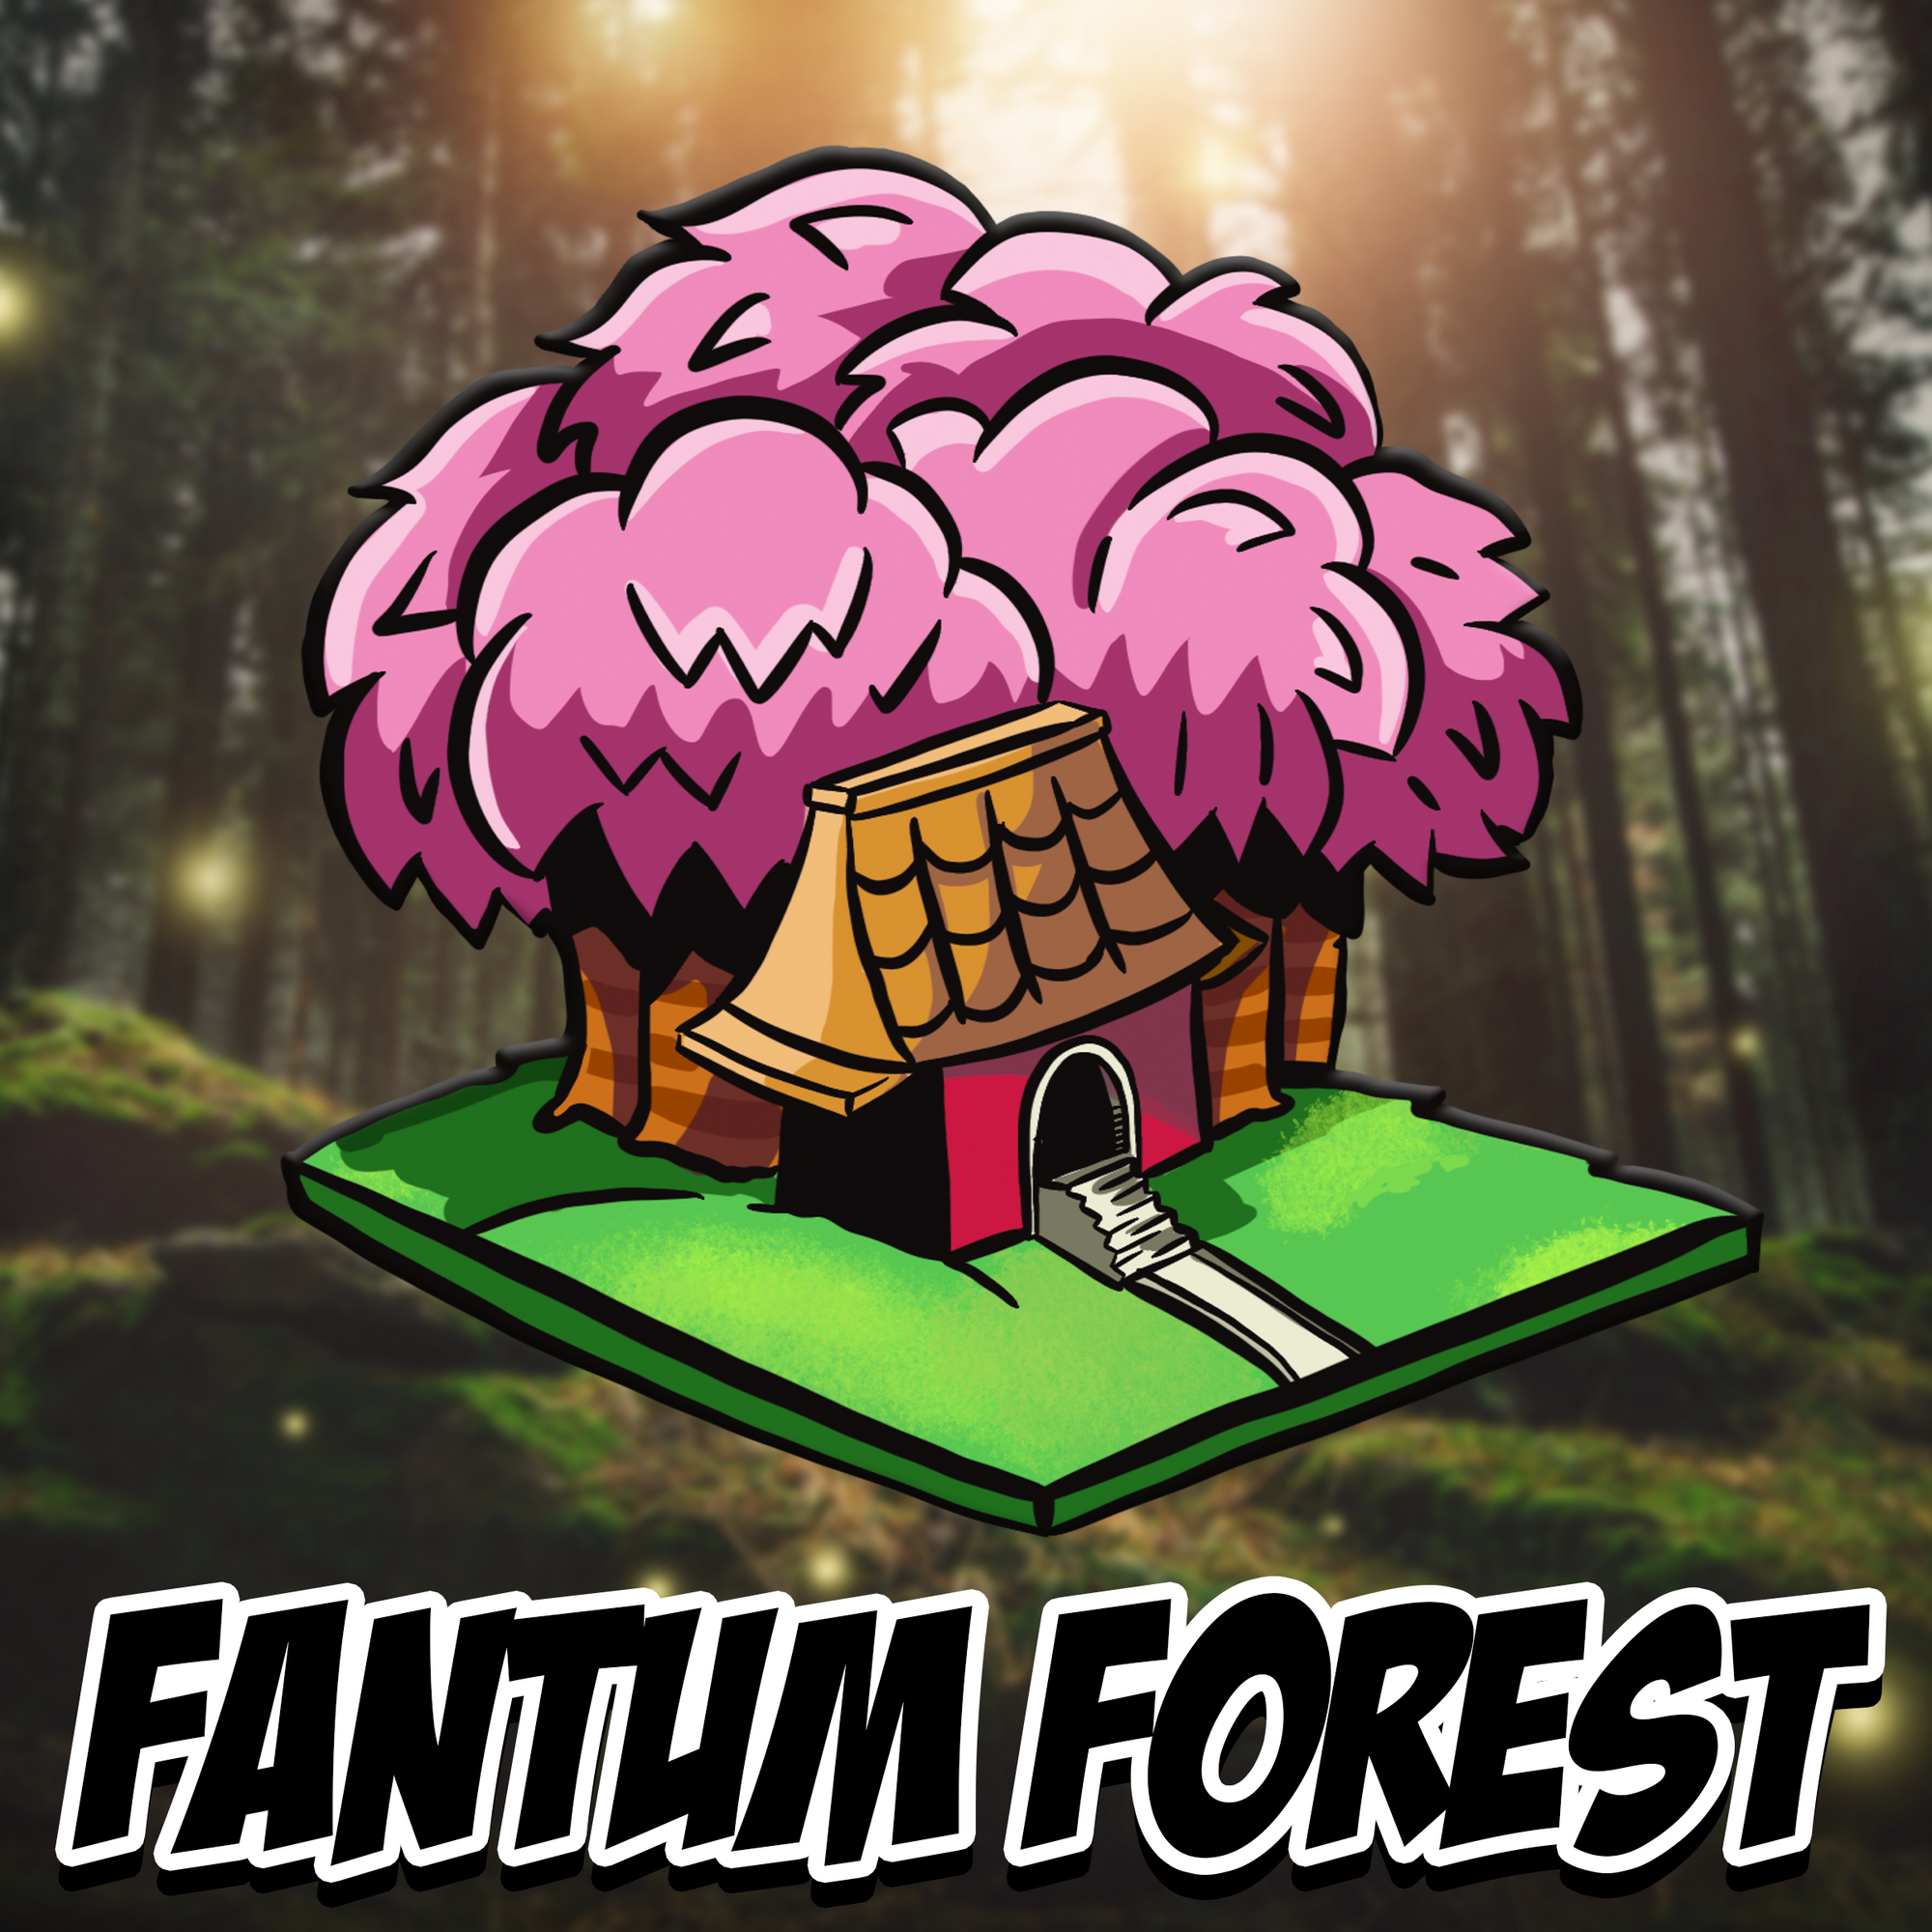 Fantum Forest in Smashcraft's Planet Future Zero, filled with mystical monsters and home to Little Red Riding Hood 